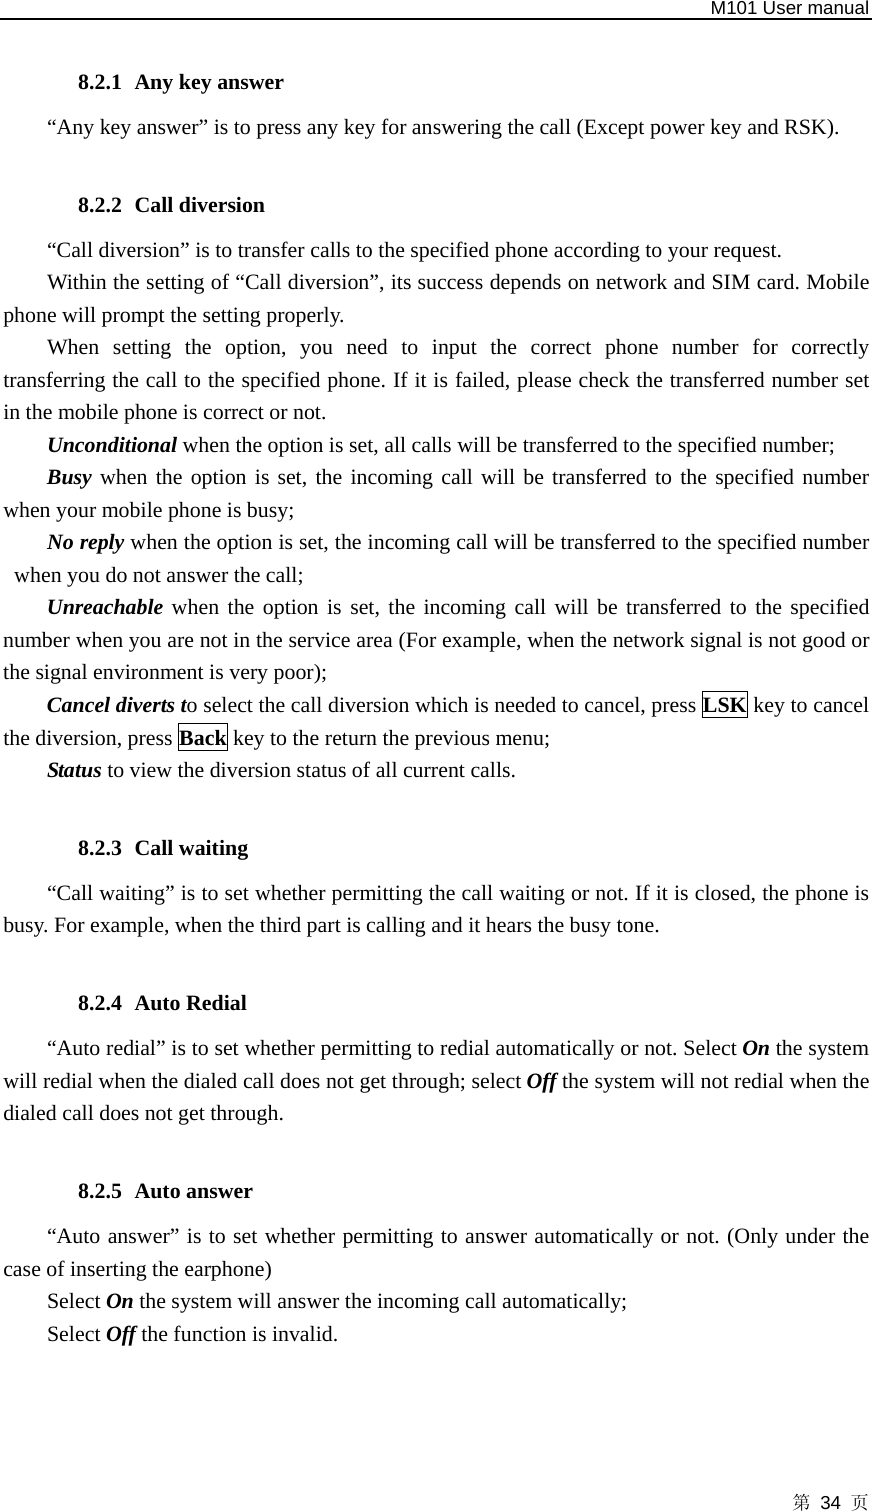   M101 User manual 第 34 页  8.2.1 Any key answer   “Any key answer” is to press any key for answering the call (Except power key and RSK).  8.2.2 Call diversion “Call diversion” is to transfer calls to the specified phone according to your request.   Within the setting of “Call diversion”, its success depends on network and SIM card. Mobile phone will prompt the setting properly.   When setting the option, you need to input the correct phone number for correctly transferring the call to the specified phone. If it is failed, please check the transferred number set in the mobile phone is correct or not.   Unconditional when the option is set, all calls will be transferred to the specified number;   Busy when the option is set, the incoming call will be transferred to the specified number when your mobile phone is busy;   No reply when the option is set, the incoming call will be transferred to the specified number when you do not answer the call;   Unreachable when the option is set, the incoming call will be transferred to the specified number when you are not in the service area (For example, when the network signal is not good or the signal environment is very poor);   Cancel diverts to select the call diversion which is needed to cancel, press LSK key to cancel the diversion, press Back key to the return the previous menu;   Status to view the diversion status of all current calls.  8.2.3 Call waiting   “Call waiting” is to set whether permitting the call waiting or not. If it is closed, the phone is busy. For example, when the third part is calling and it hears the busy tone.  8.2.4 Auto Redial “Auto redial” is to set whether permitting to redial automatically or not. Select On the system will redial when the dialed call does not get through; select Off the system will not redial when the dialed call does not get through.  8.2.5 Auto answer   “Auto answer” is to set whether permitting to answer automatically or not. (Only under the case of inserting the earphone)   Select On the system will answer the incoming call automatically;   Select Off the function is invalid.  